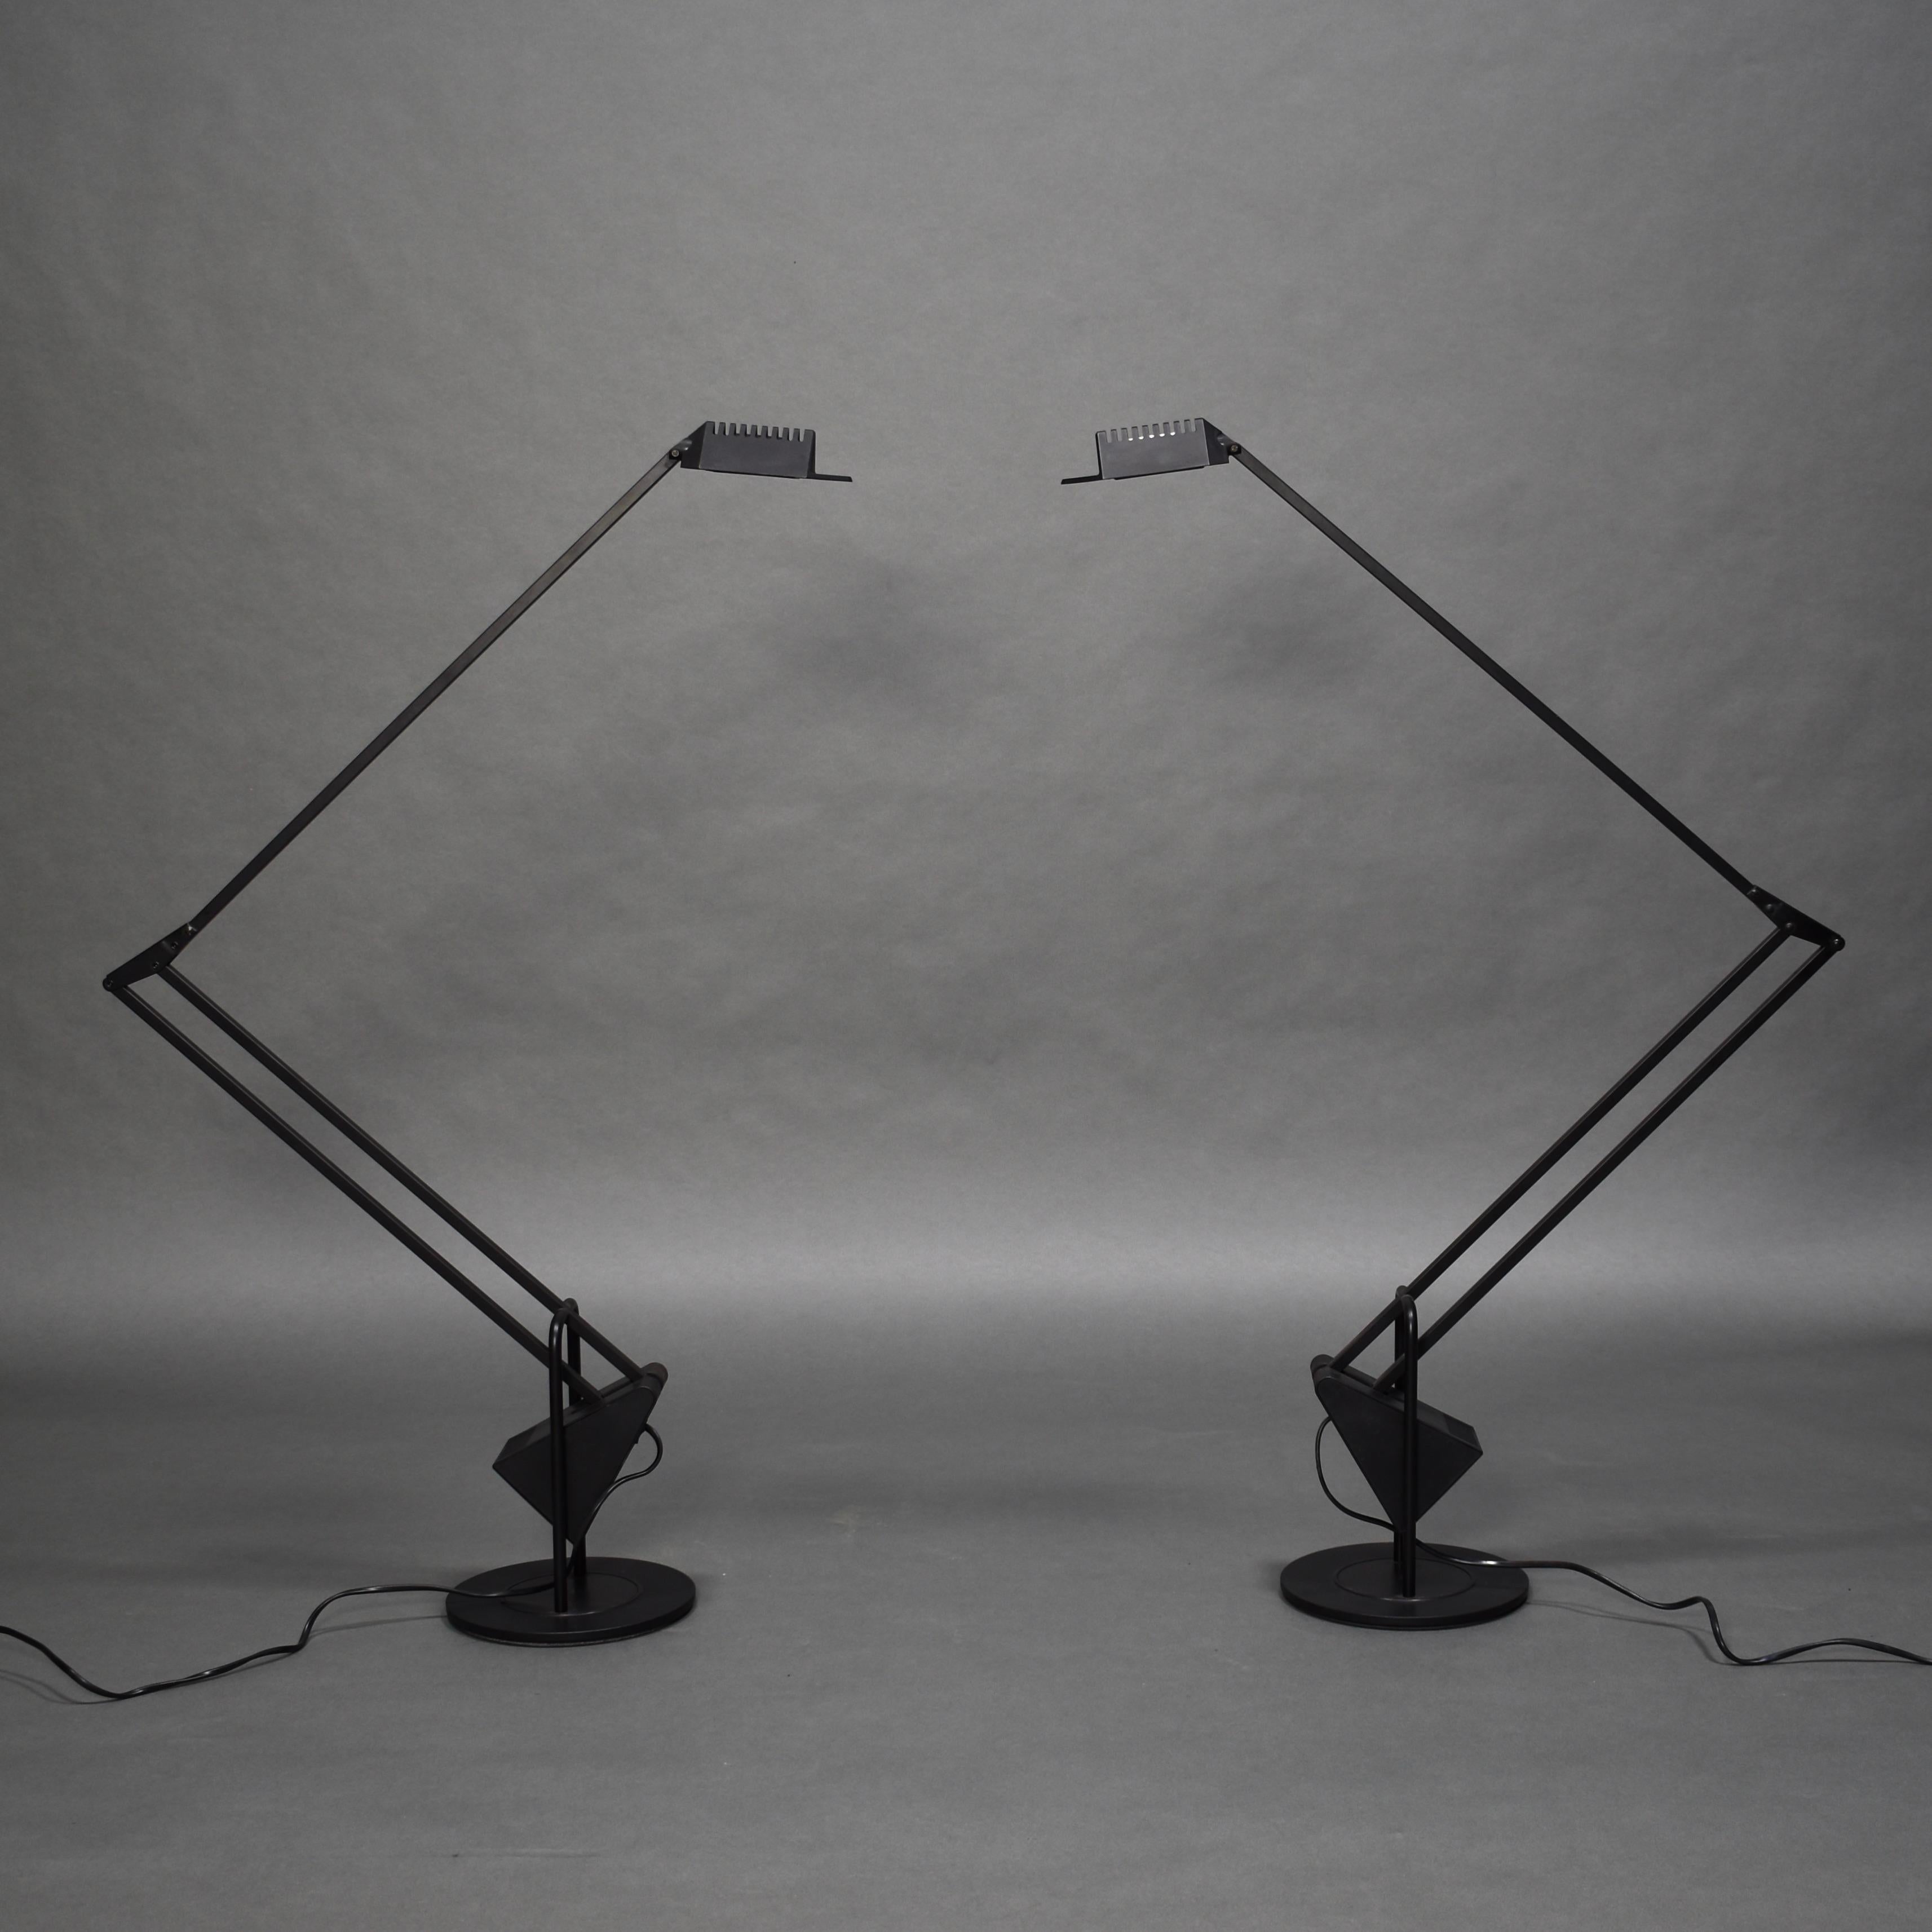 Pair of ‘Flamingo’ counterweight table / floor lamps by Fridolin Naef for Luxo – Italy, 1980’s. 
The height of the lamps also makes them suitable for floor lamp use.

Designer: Fridolin Naef

Manufacturer: Luxo

Country: Italy

Model: